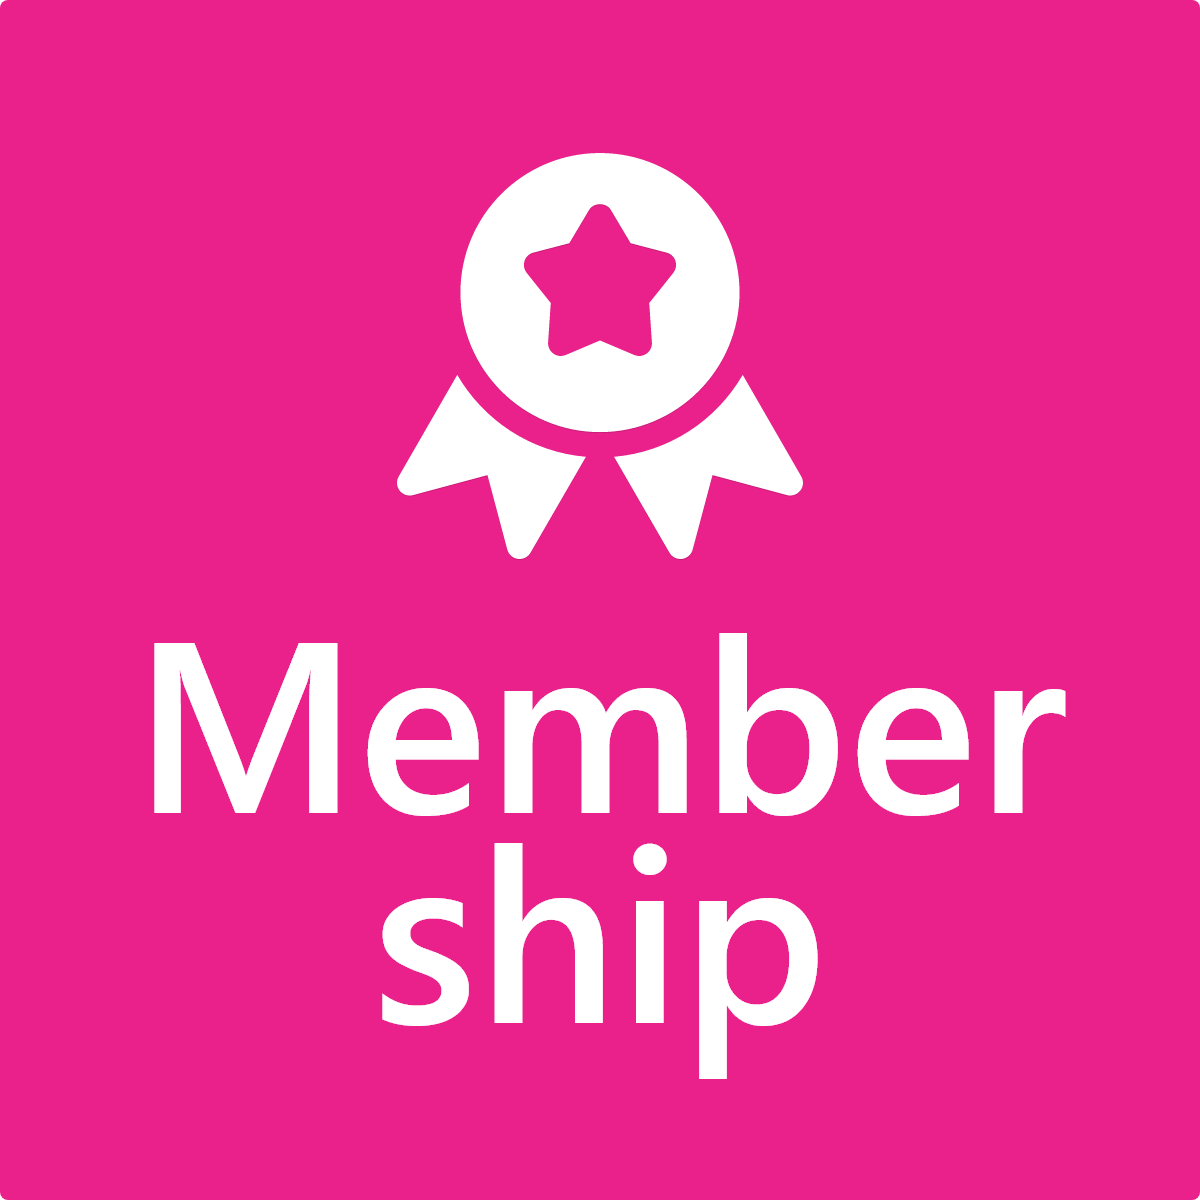 Shopify Membership app by Aaaecommerce inc